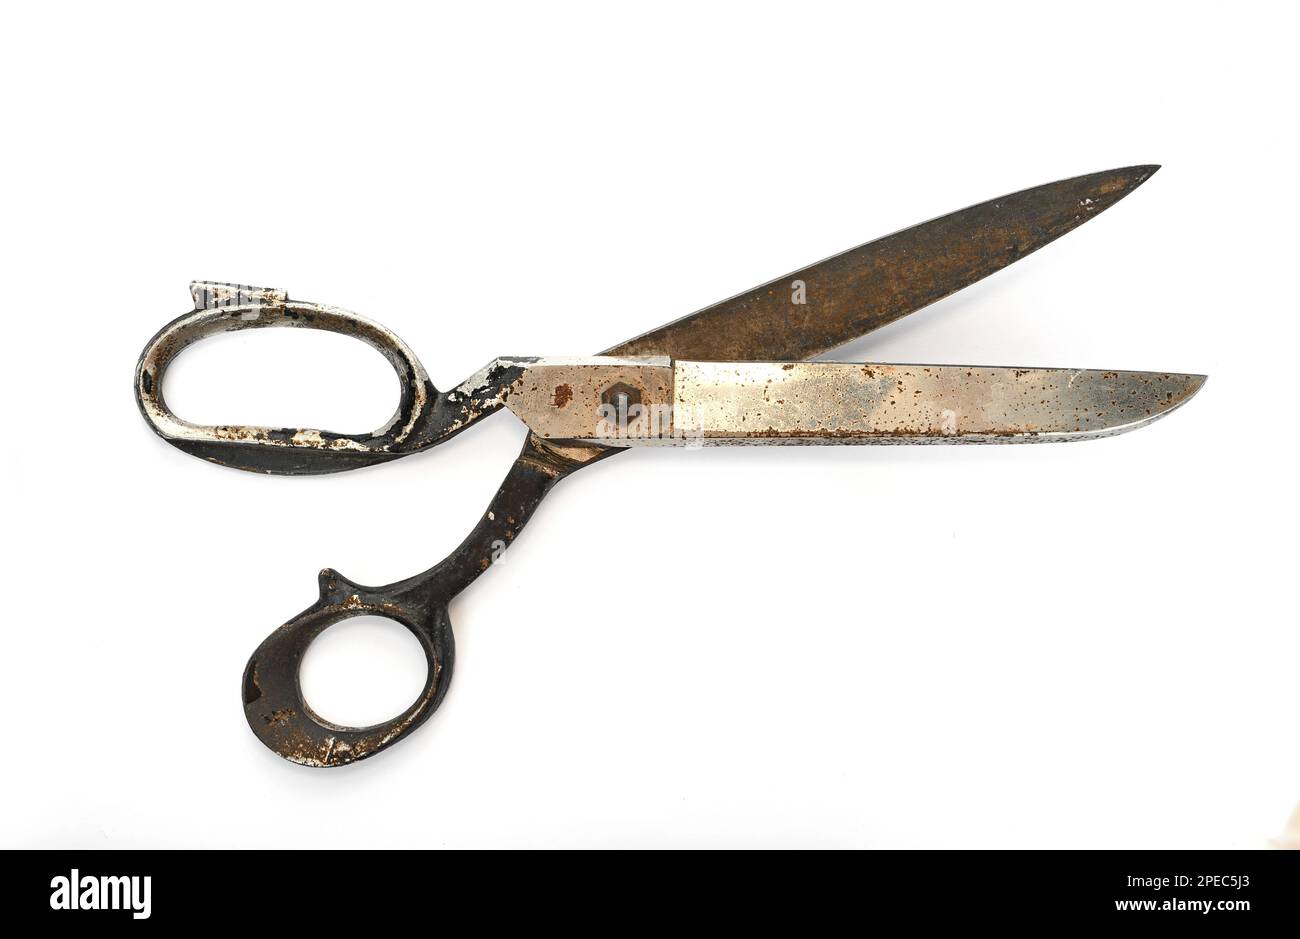 Little Scissors Isolated On White Background Stock Photo, Picture and  Royalty Free Image. Image 80196537.